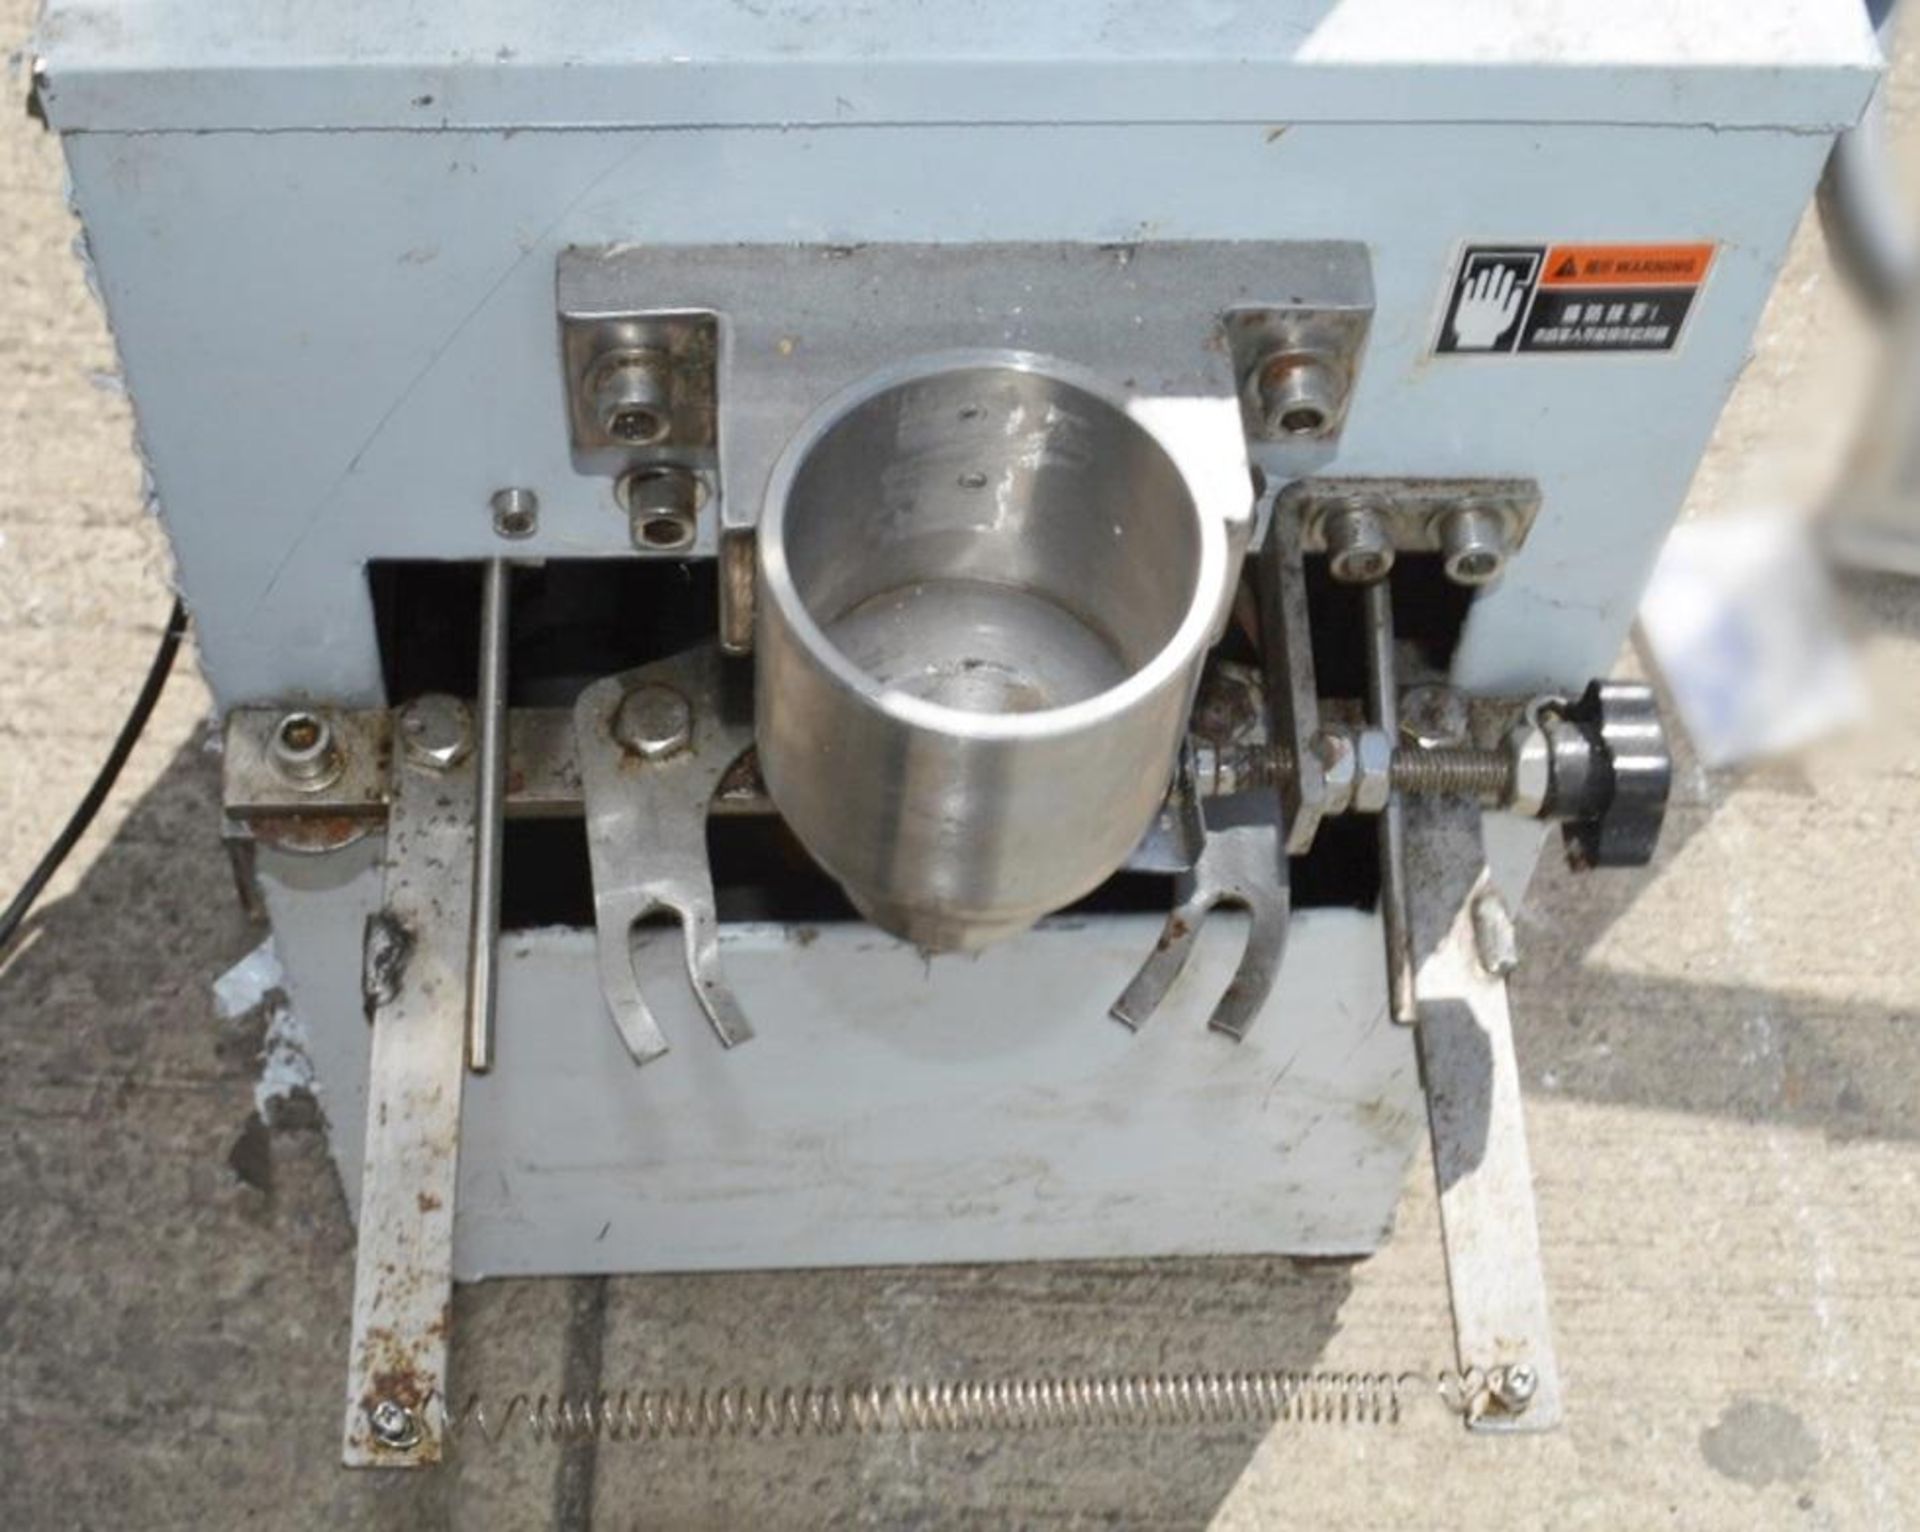 1 x Industrial Meatball Machine (Model: SXW-280) - Dimensions: H123 x W27 x D57cmPre-owned, Taken Fr - Image 4 of 5